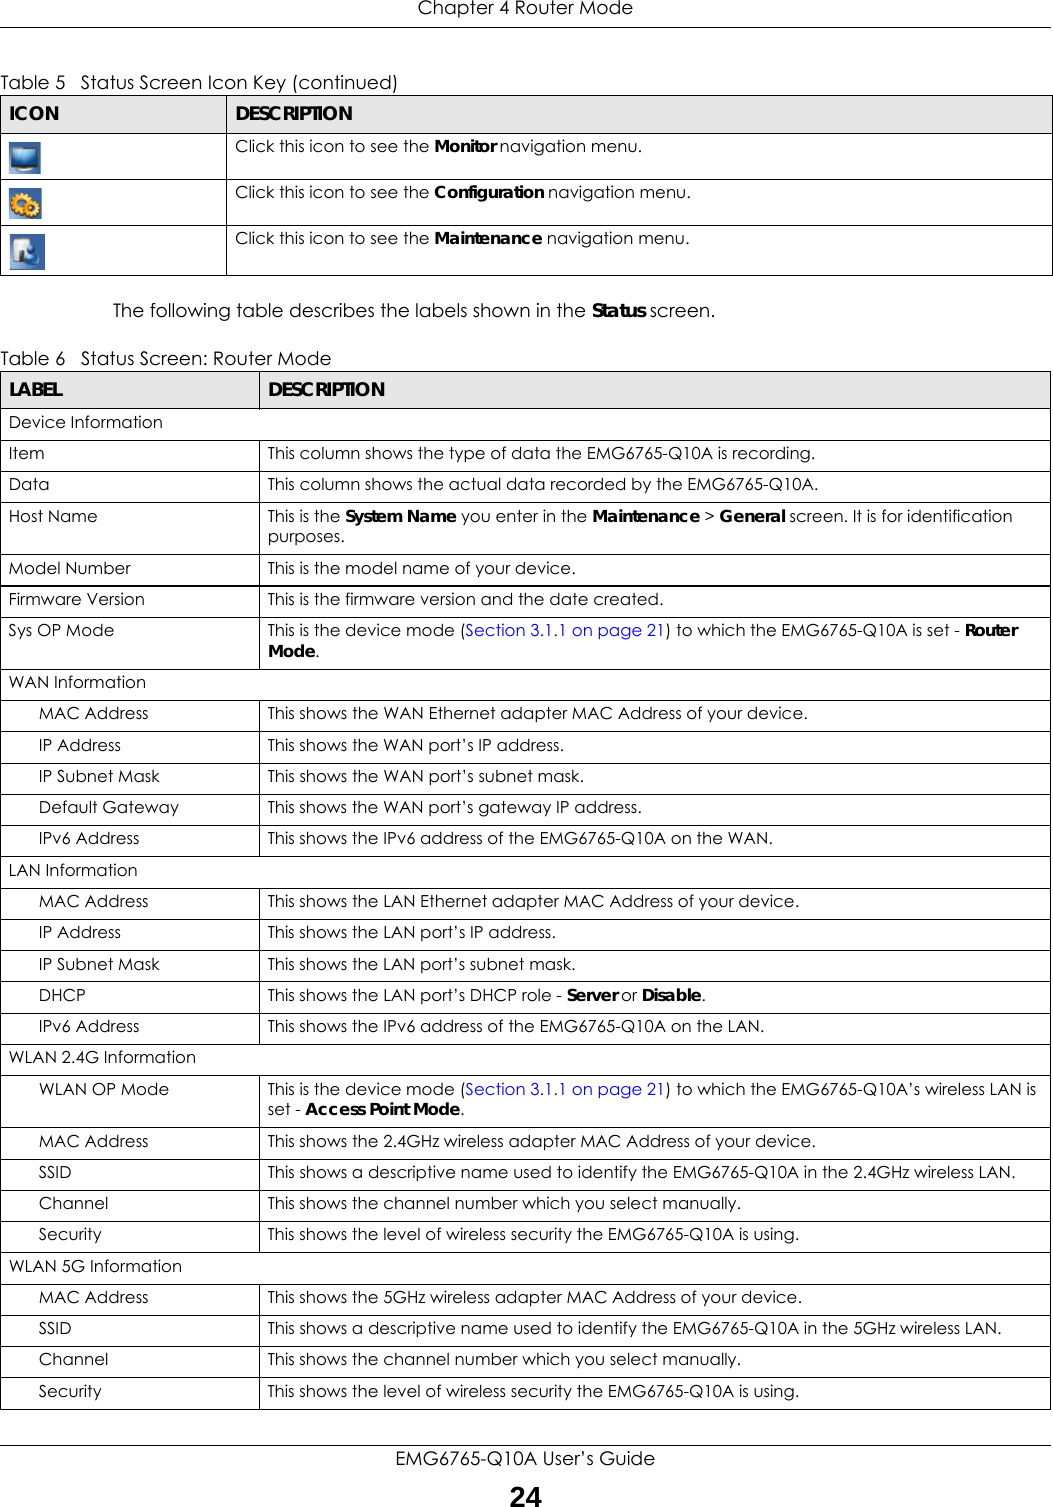 Chapter 4 Router ModeEMG6765-Q10A User’s Guide24The following table describes the labels shown in the Status screen.Click this icon to see the Monitor navigation menu. Click this icon to see the Configuration navigation menu. Click this icon to see the Maintenance navigation menu. Table 5   Status Screen Icon Key (continued)ICON DESCRIPTIONTable 6   Status Screen: Router Mode  LABEL DESCRIPTIONDevice InformationItem This column shows the type of data the EMG6765-Q10A is recording.Data This column shows the actual data recorded by the EMG6765-Q10A.Host Name This is the System Name you enter in the Maintenance &gt; General screen. It is for identification purposes.Model Number This is the model name of your device.Firmware Version This is the firmware version and the date created. Sys OP Mode This is the device mode (Section 3.1.1 on page 21) to which the EMG6765-Q10A is set - Router Mode.WAN InformationMAC Address This shows the WAN Ethernet adapter MAC Address of your device.IP Address This shows the WAN port’s IP address.IP Subnet Mask This shows the WAN port’s subnet mask.Default Gateway This shows the WAN port’s gateway IP address.IPv6 Address This shows the IPv6 address of the EMG6765-Q10A on the WAN.LAN InformationMAC Address This shows the LAN Ethernet adapter MAC Address of your device.IP Address This shows the LAN port’s IP address.IP Subnet Mask This shows the LAN port’s subnet mask.DHCP This shows the LAN port’s DHCP role - Server or Disable.IPv6 Address This shows the IPv6 address of the EMG6765-Q10A on the LAN.WLAN 2.4G InformationWLAN OP Mode This is the device mode (Section 3.1.1 on page 21) to which the EMG6765-Q10A’s wireless LAN is set - Access Point Mode.MAC Address This shows the 2.4GHz wireless adapter MAC Address of your device.SSID This shows a descriptive name used to identify the EMG6765-Q10A in the 2.4GHz wireless LAN. Channel This shows the channel number which you select manually.Security This shows the level of wireless security the EMG6765-Q10A is using.WLAN 5G InformationMAC Address This shows the 5GHz wireless adapter MAC Address of your device.SSID This shows a descriptive name used to identify the EMG6765-Q10A in the 5GHz wireless LAN. Channel This shows the channel number which you select manually.Security This shows the level of wireless security the EMG6765-Q10A is using.